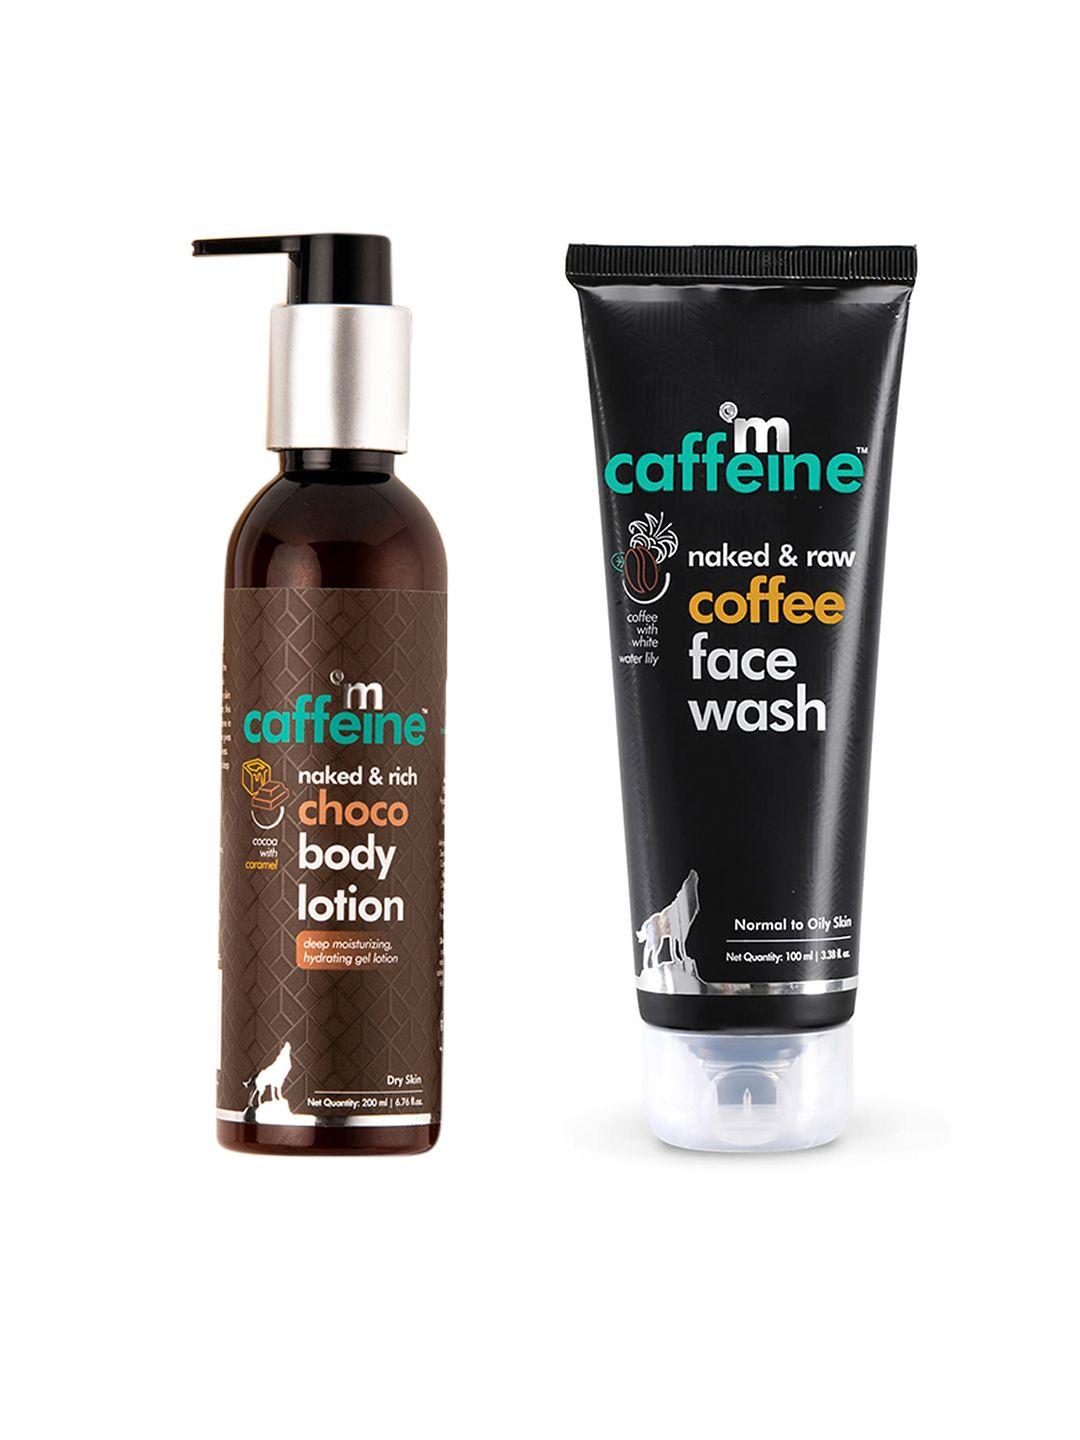 mcaffeine set of naked & rich choco body lotion - naked & raw coffee face wash